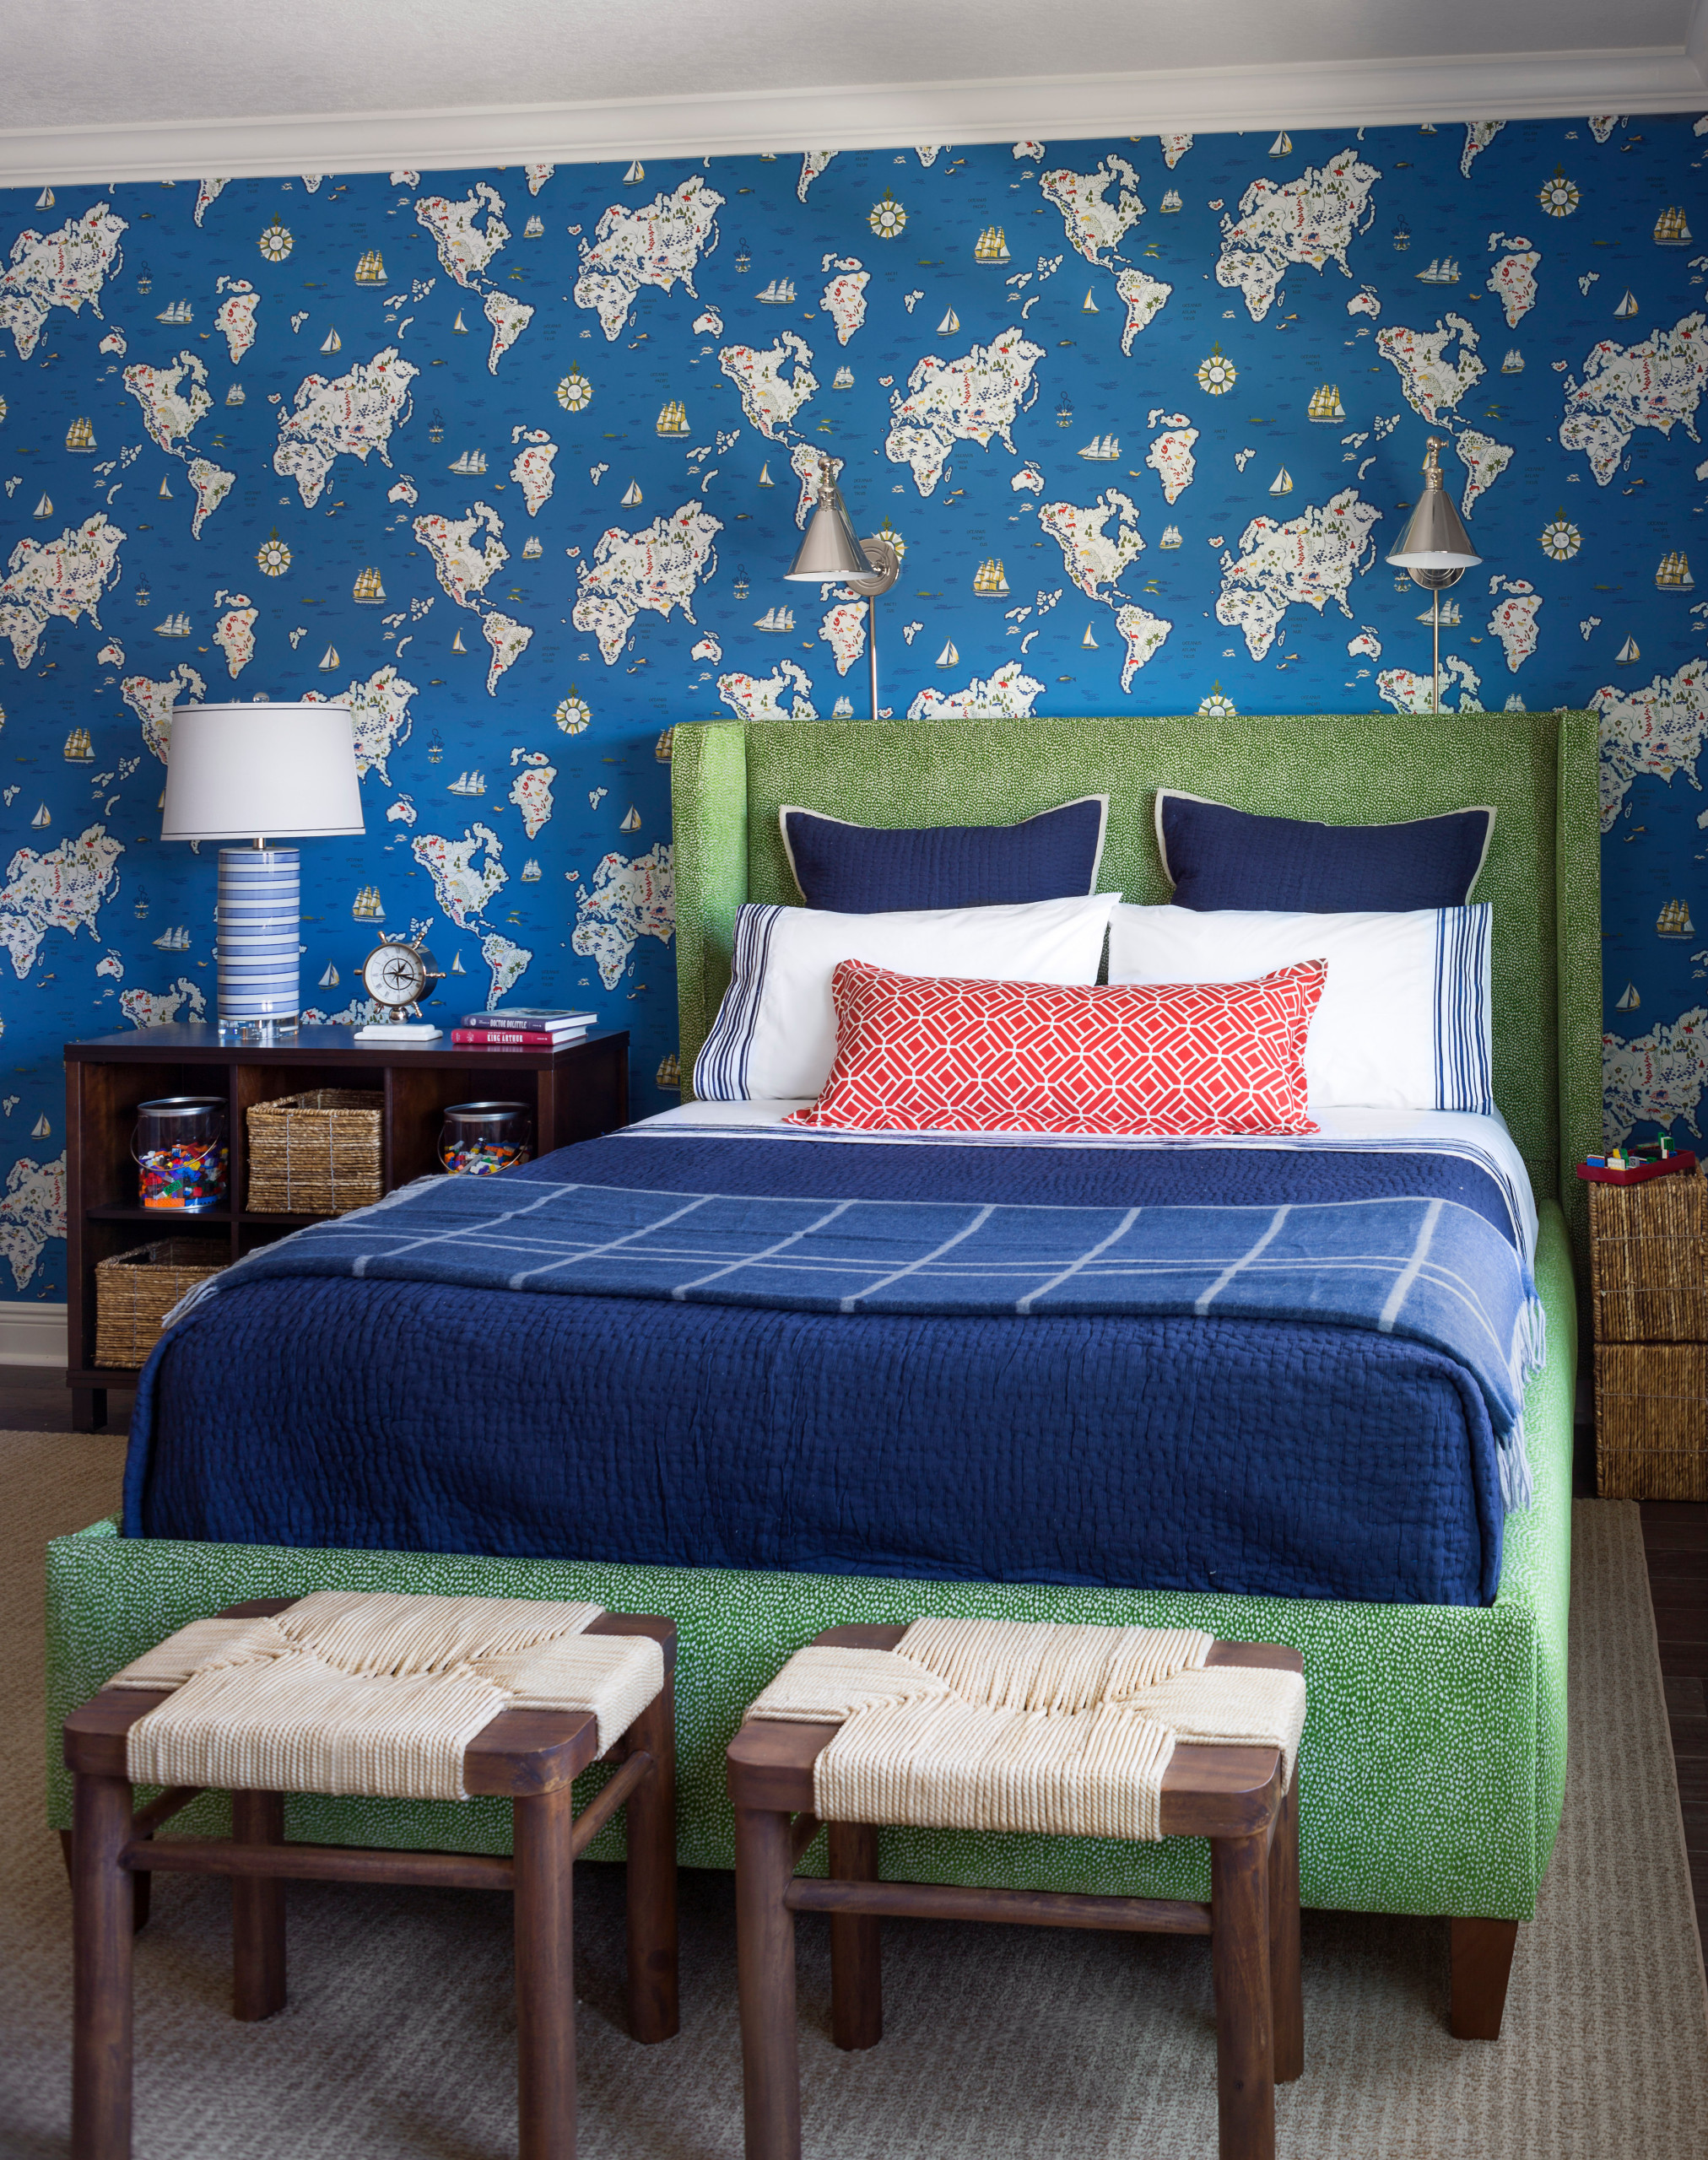 75 Beautiful Kids' Room Pictures & Ideas - Color: Blue - March, 2023 | Houzz